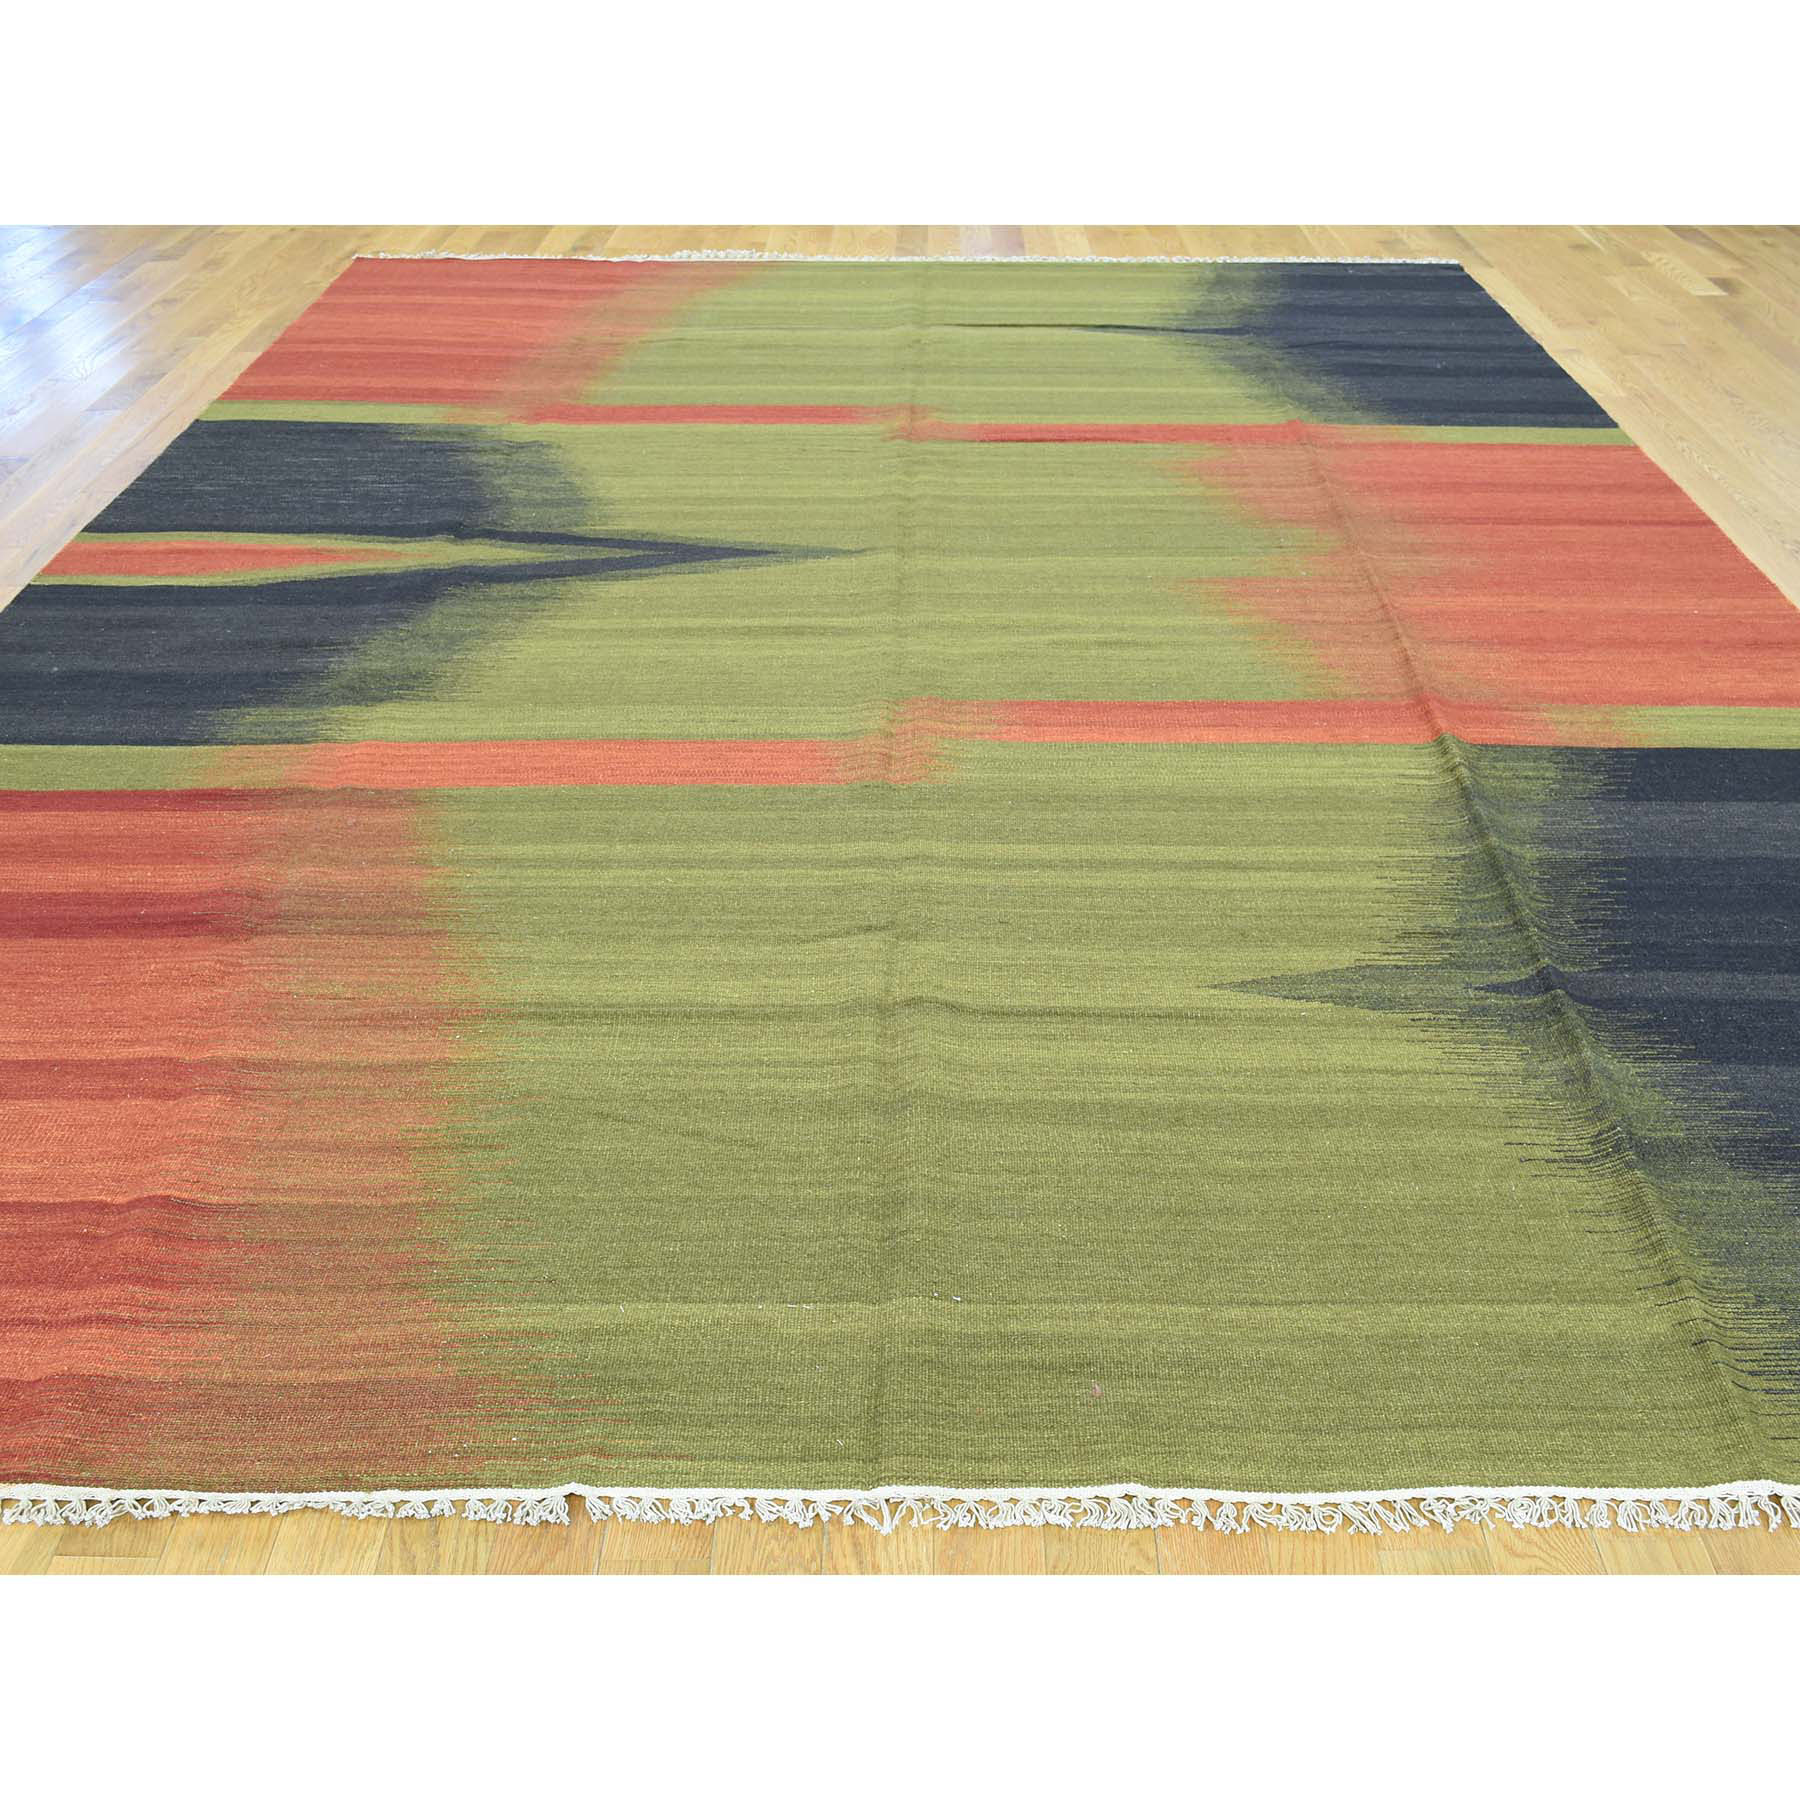 9'1"x12'4" Hand-Woven Colorful Durie Kilim Flat Weave Pure Wool Carpet 